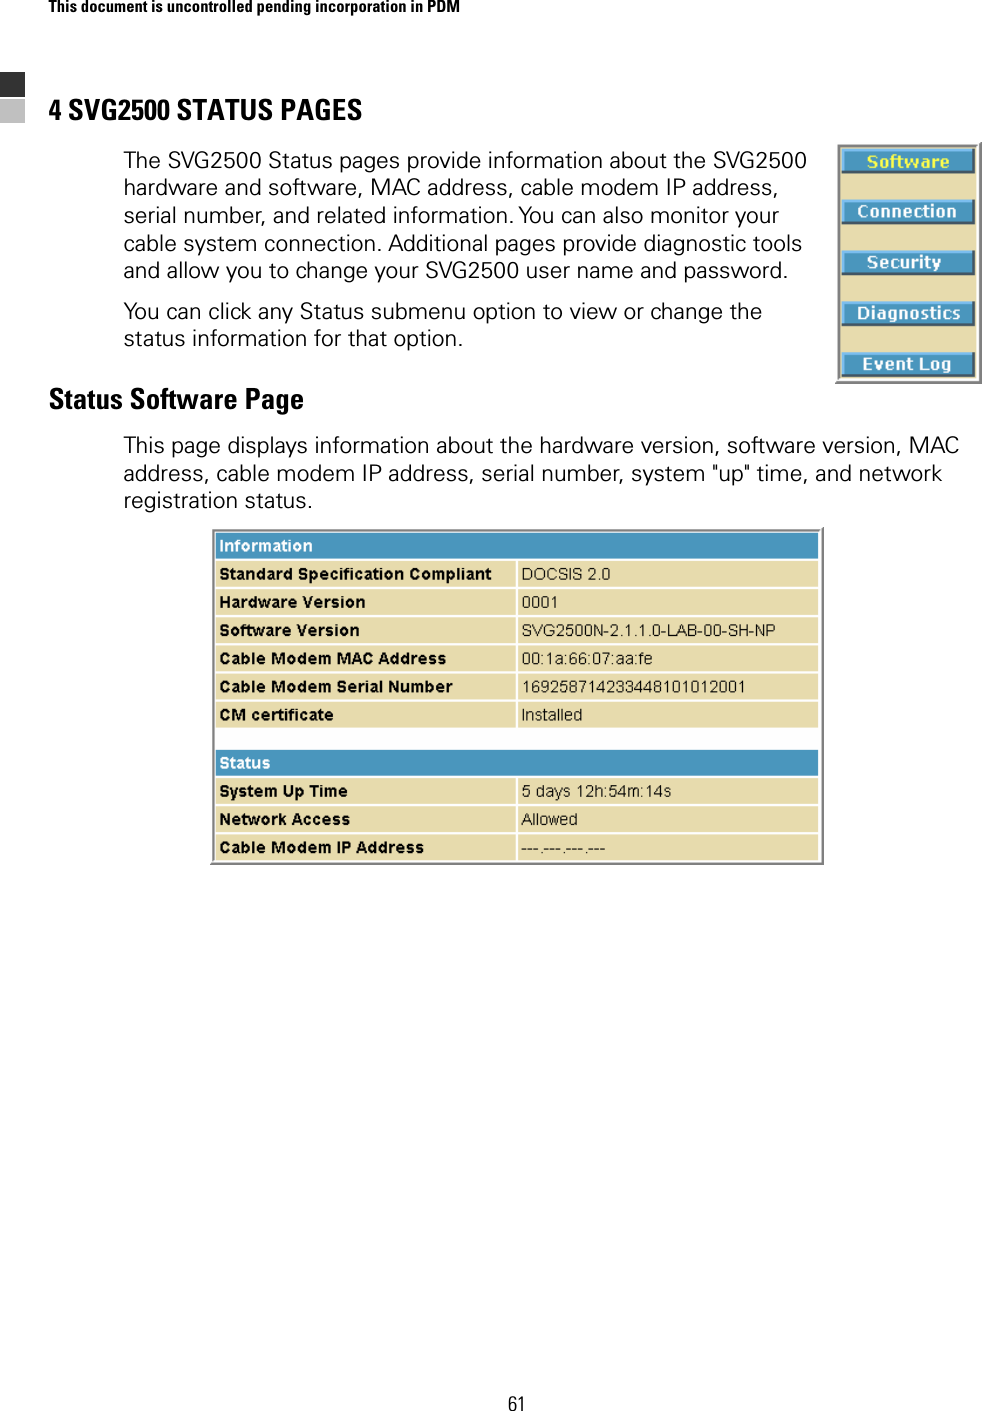 This document is uncontrolled pending incorporation in PDM  61 4 SVG2500 STATUS PAGES The SVG2500 Status pages provide information about the SVG2500 hardware and software, MAC address, cable modem IP address, serial number, and related information. You can also monitor your cable system connection. Additional pages provide diagnostic tools and allow you to change your SVG2500 user name and password. You can click any Status submenu option to view or change the status information for that option. Status Software Page This page displays information about the hardware version, software version, MAC address, cable modem IP address, serial number, system &quot;up&quot; time, and network registration status.   